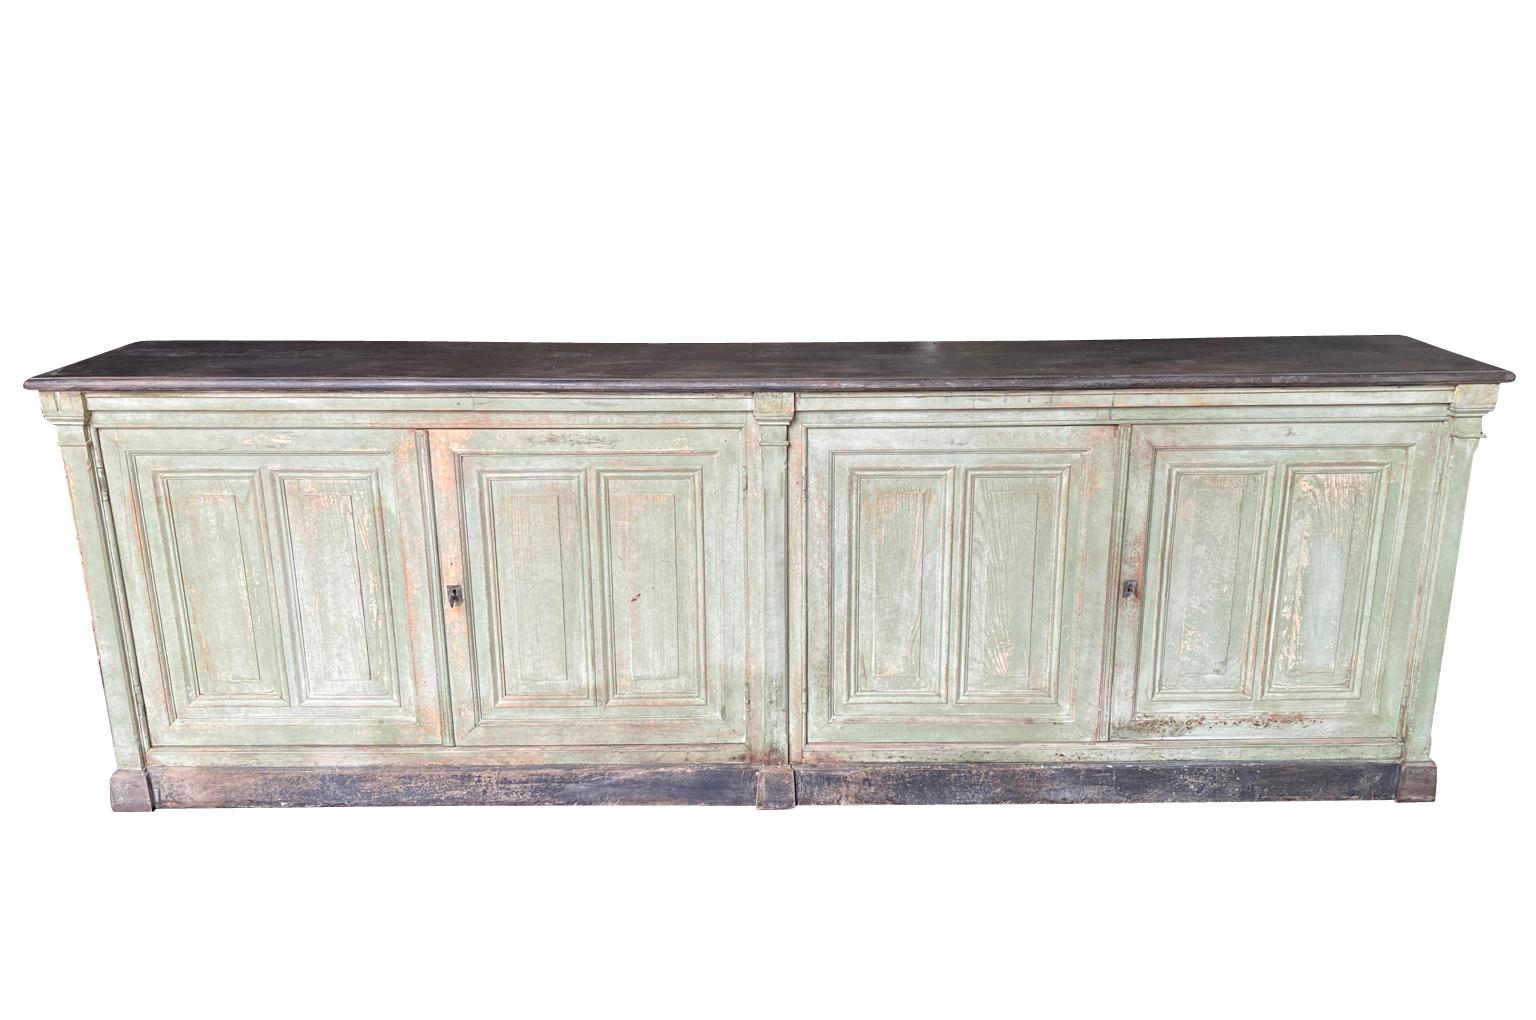 A wonderful early 19th century Enfilade - Buffet from the Provence region of France.  Soundly constructed from painted oak with 2 double doors, interior shelving and raised on a plinth base.  Super patina and finish.  Great storage piece with narrow